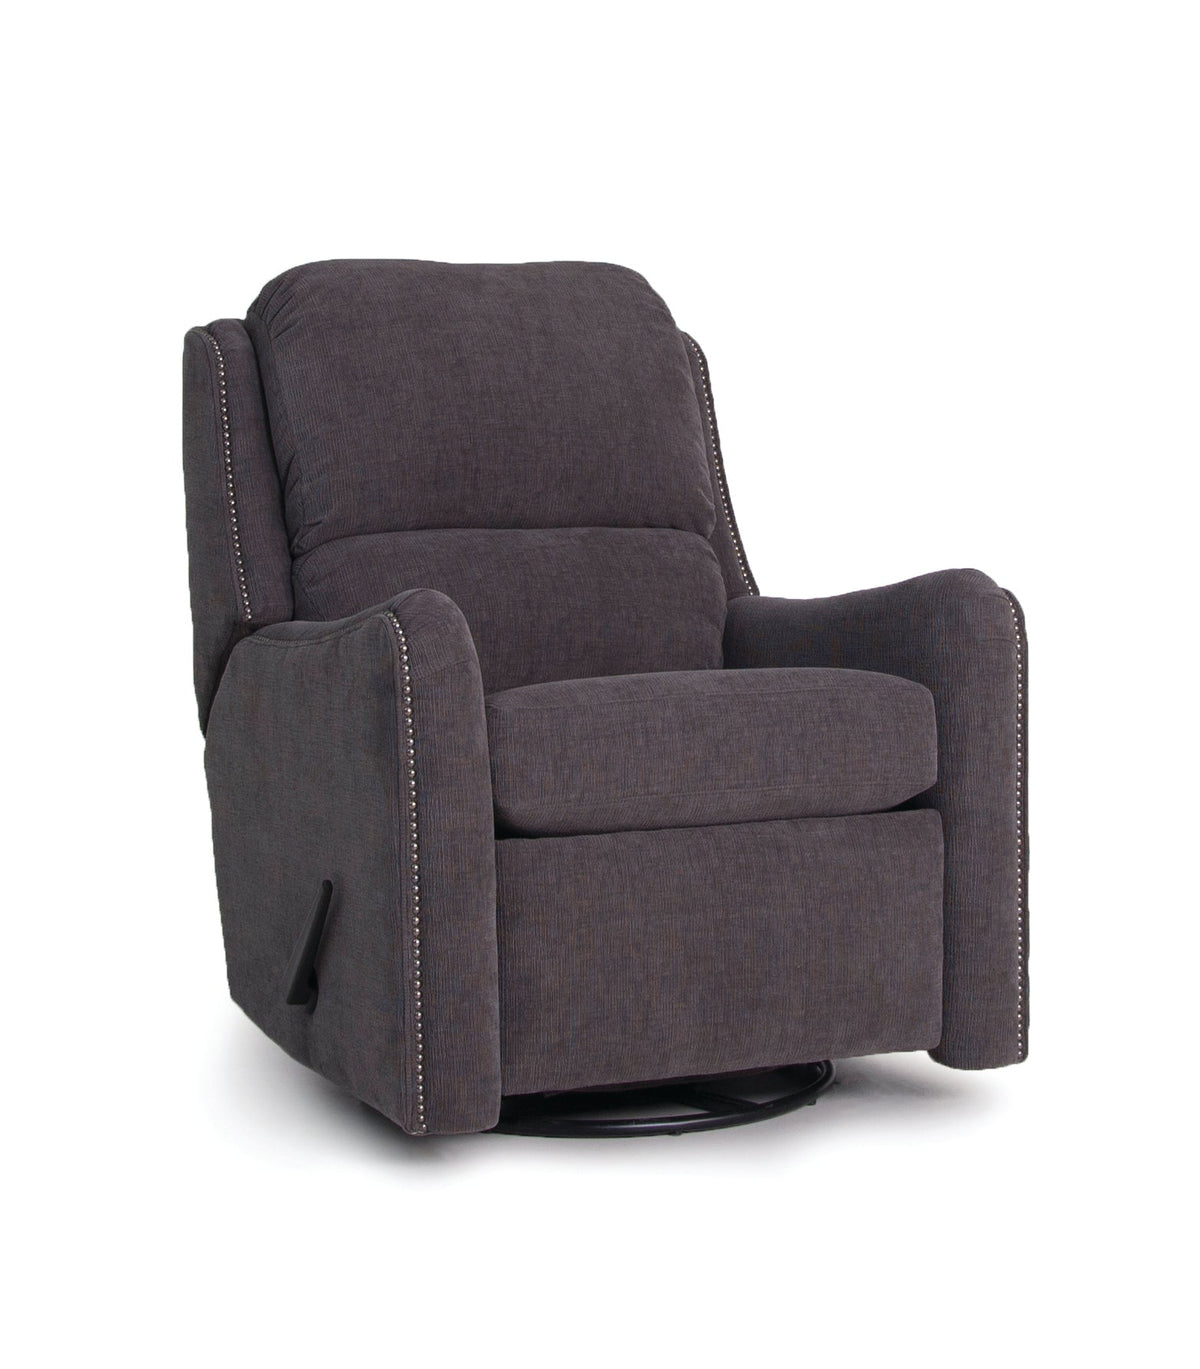 746 Style Manual Reclining Chair